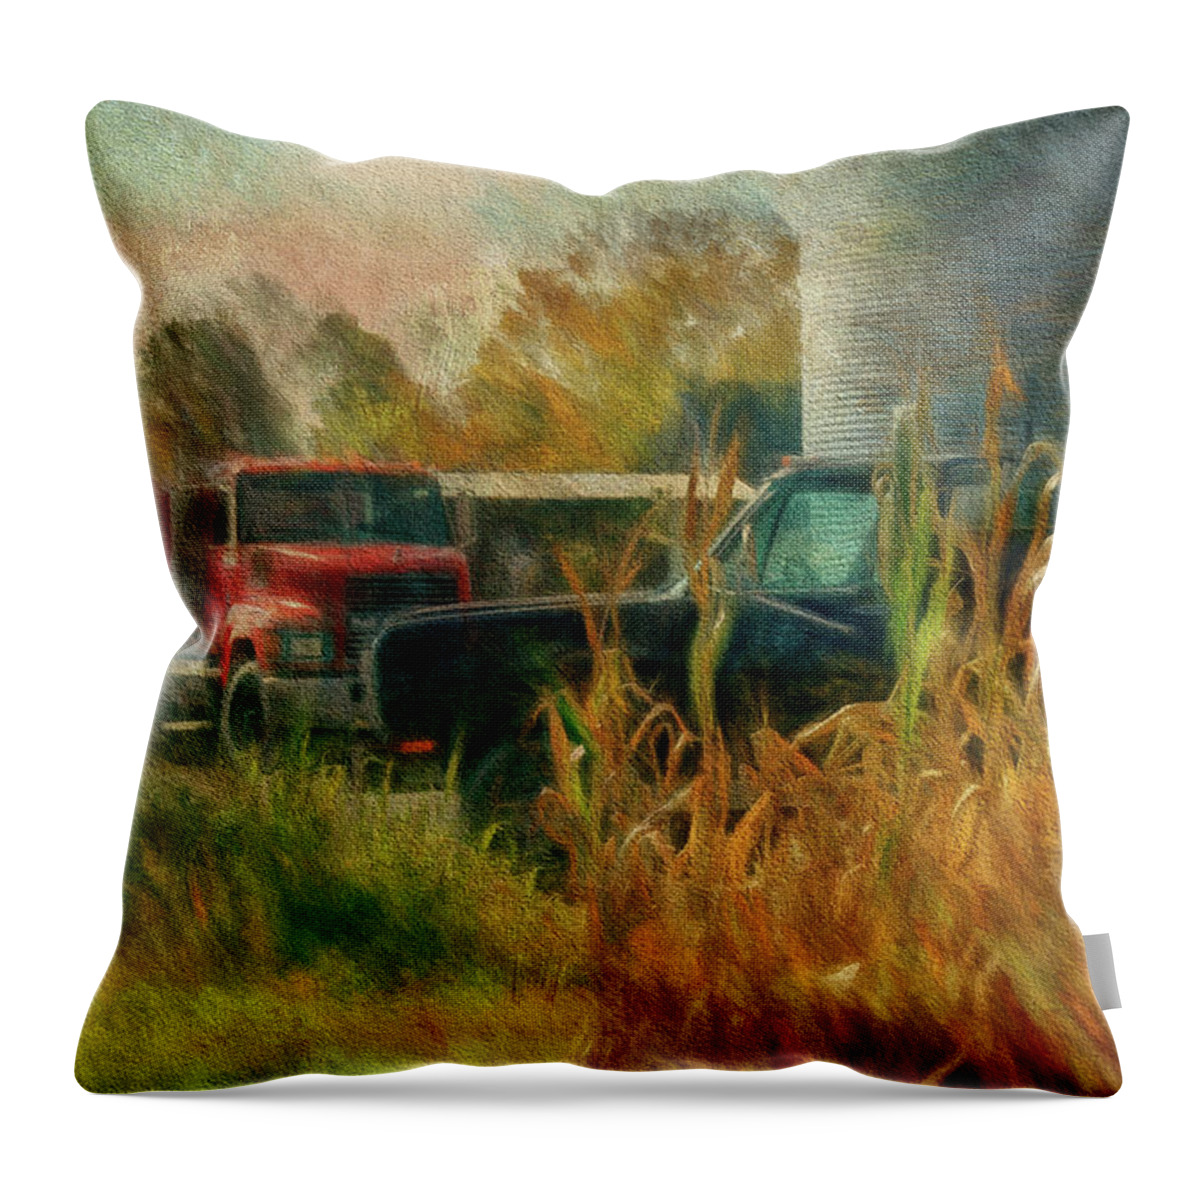 Truck Throw Pillow featuring the photograph Tools Of The Trade by Lois Bryan